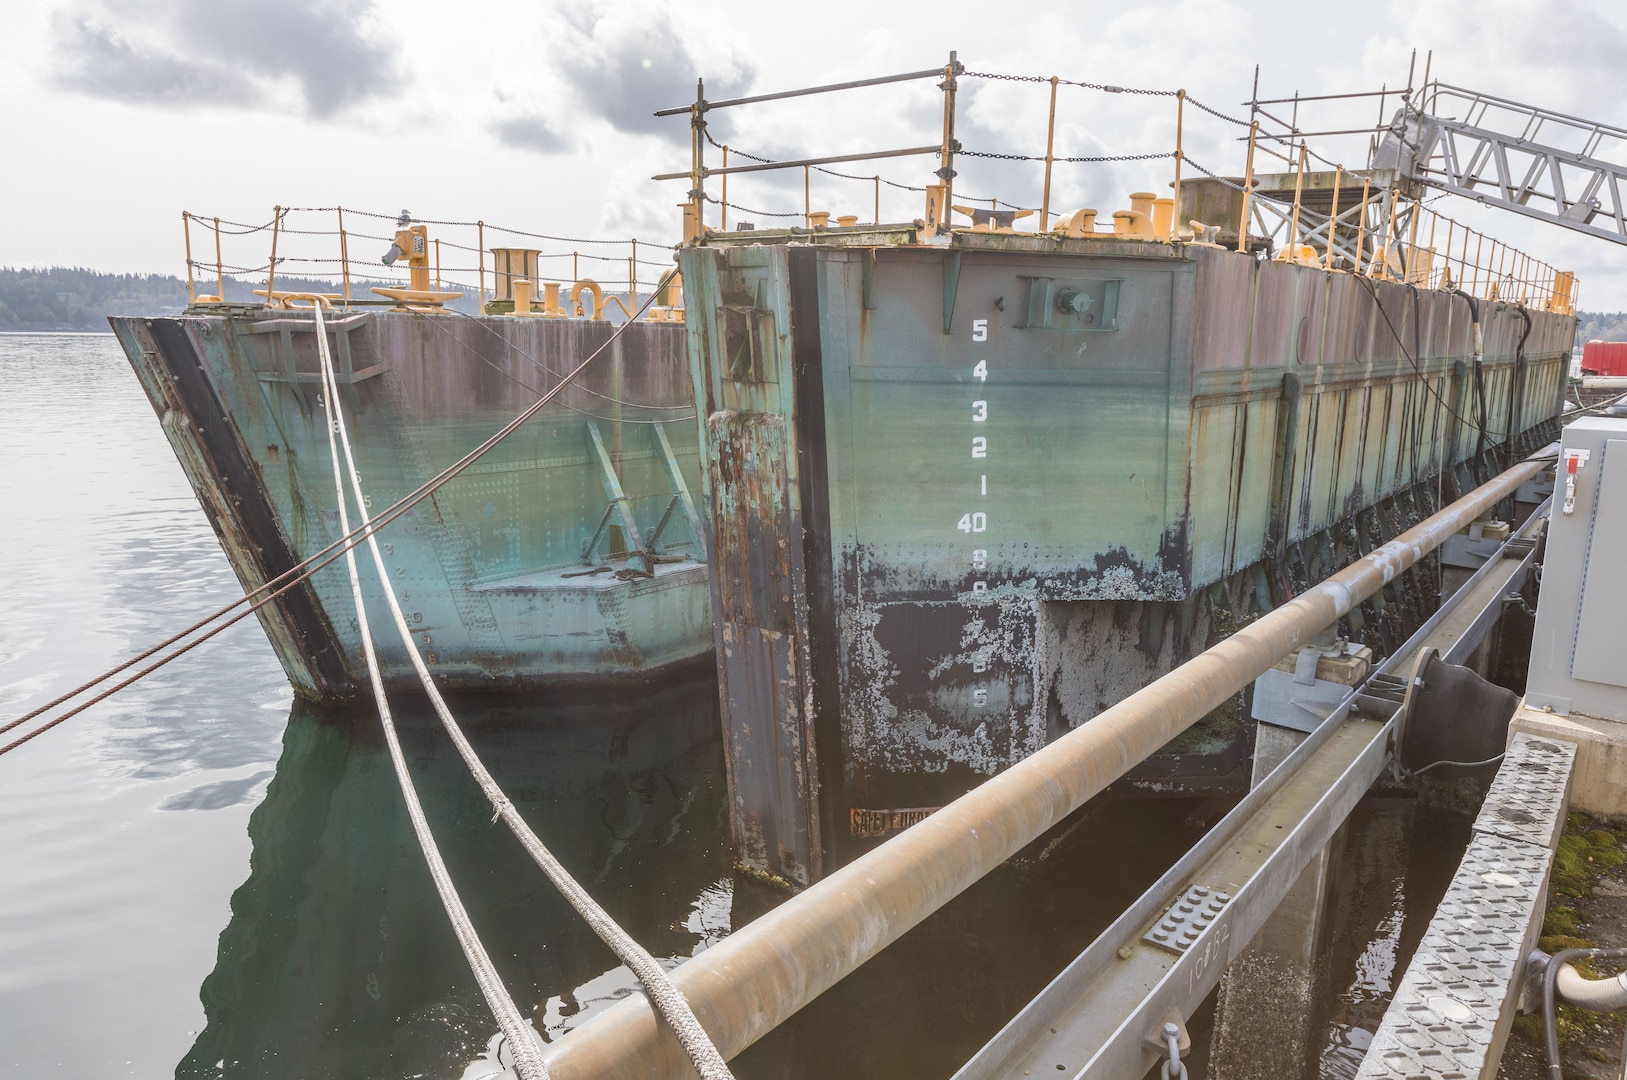 Historic caissons 2 and 3 at Puget Sound Naval Shipyard & Intermediate Maintenance Facility in Bremerton, Wash., in 2018. Two caissons are currently being offered for sale through the Defense Logistics Agency's disposition services.